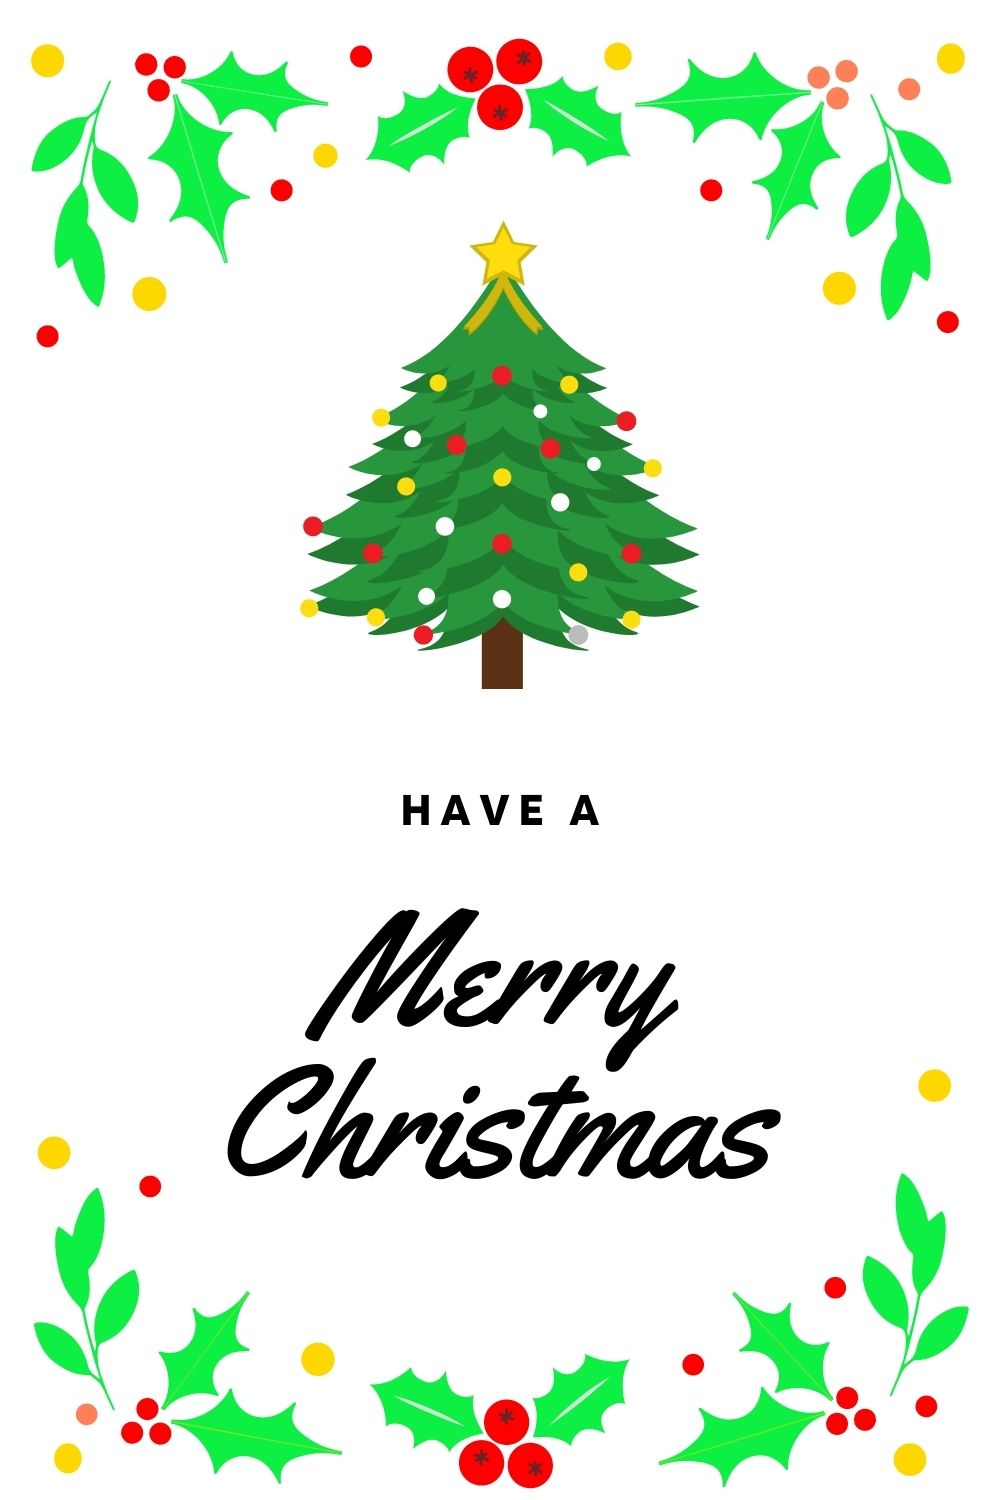 merry Christmas images free